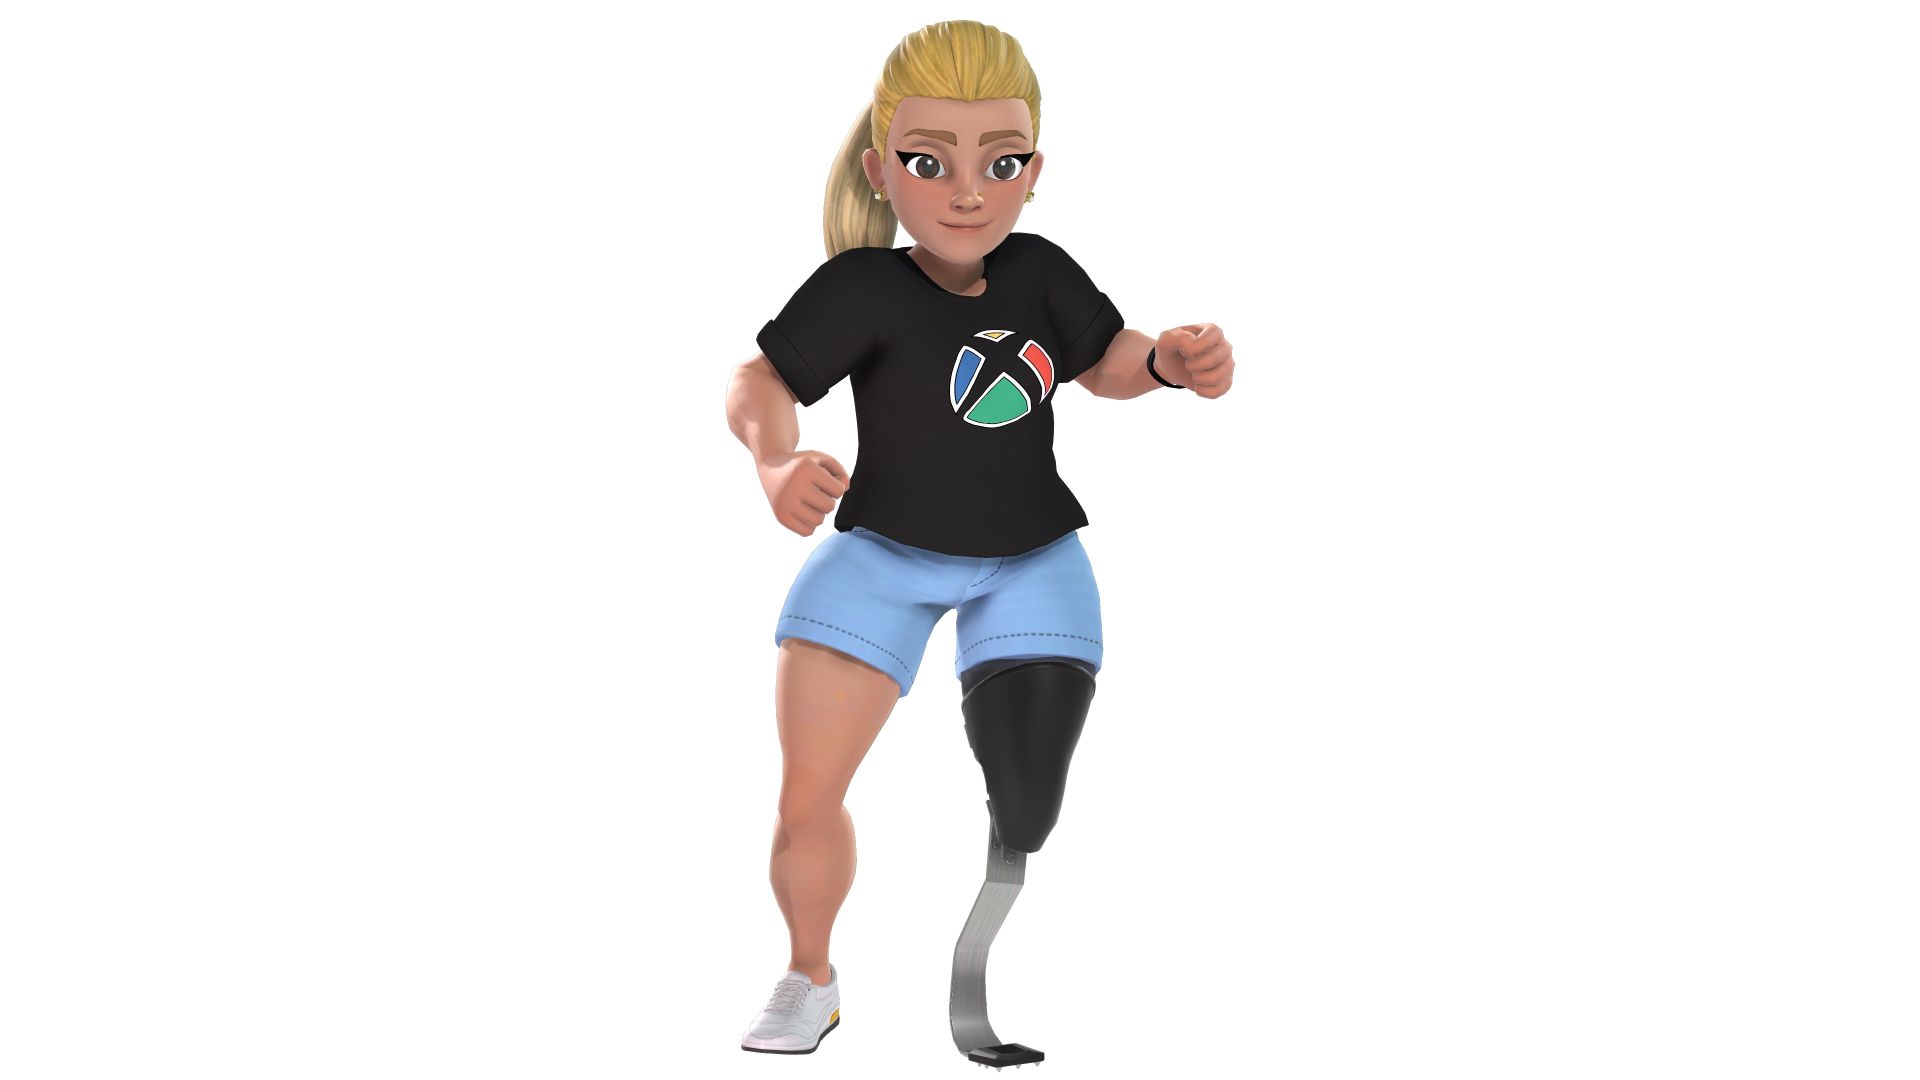 An Xbox avatar white woman wearing a black short sleeved tshirt with the Disability Pride sphere logo on the front and light denim shorts.